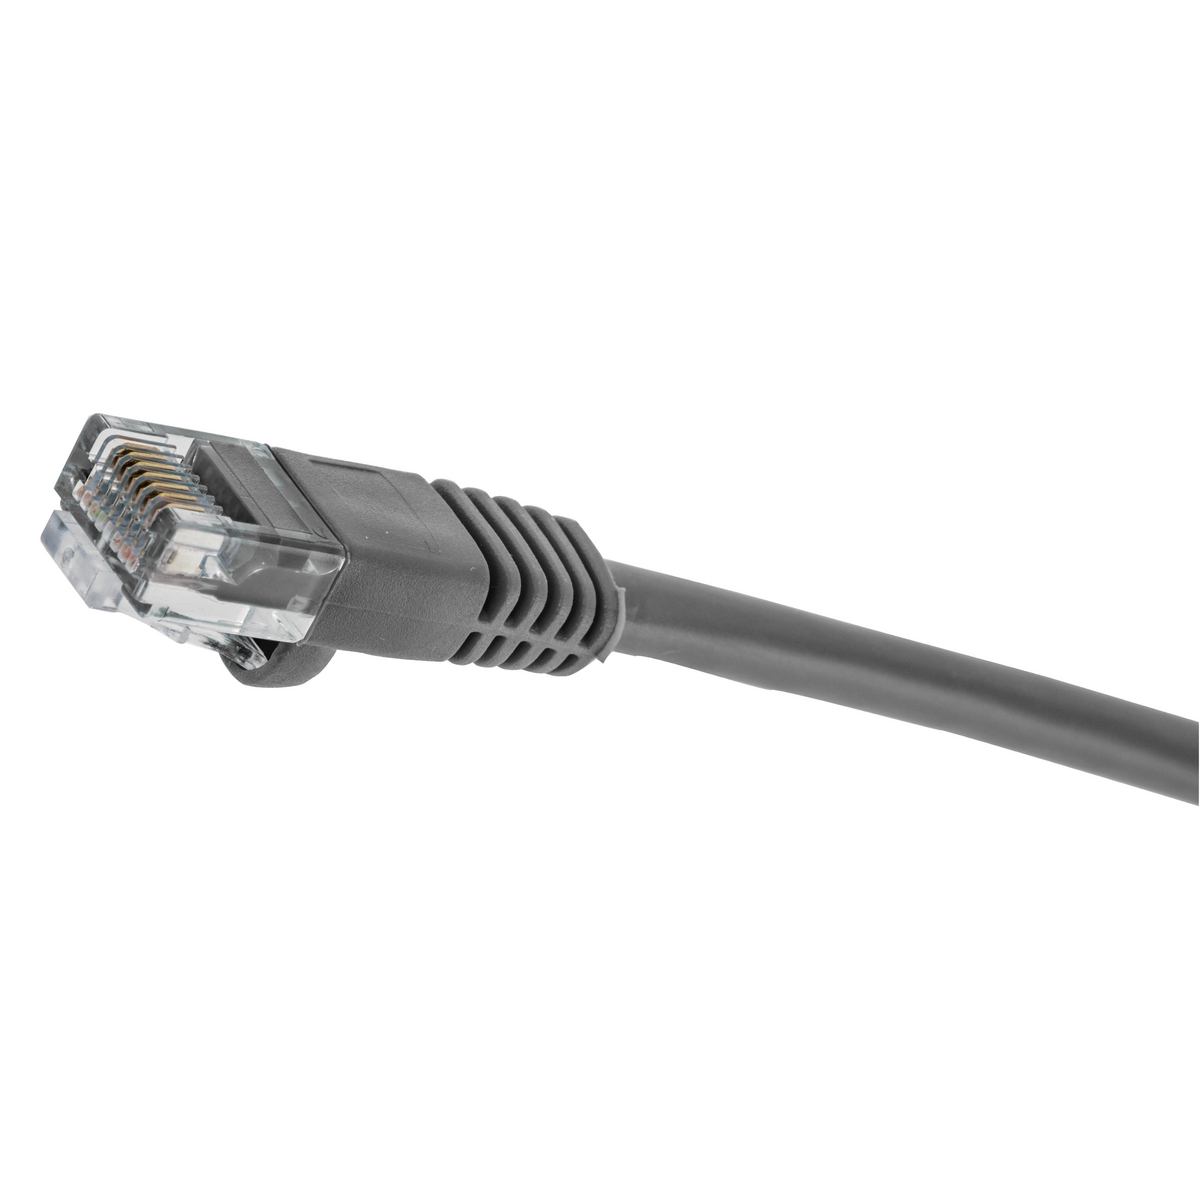 Hubbell Premise Wiring Products, Copper Solutions, Patch Cord,NETSELECT, Cat5E, Slim Style, Gray, 10' Length